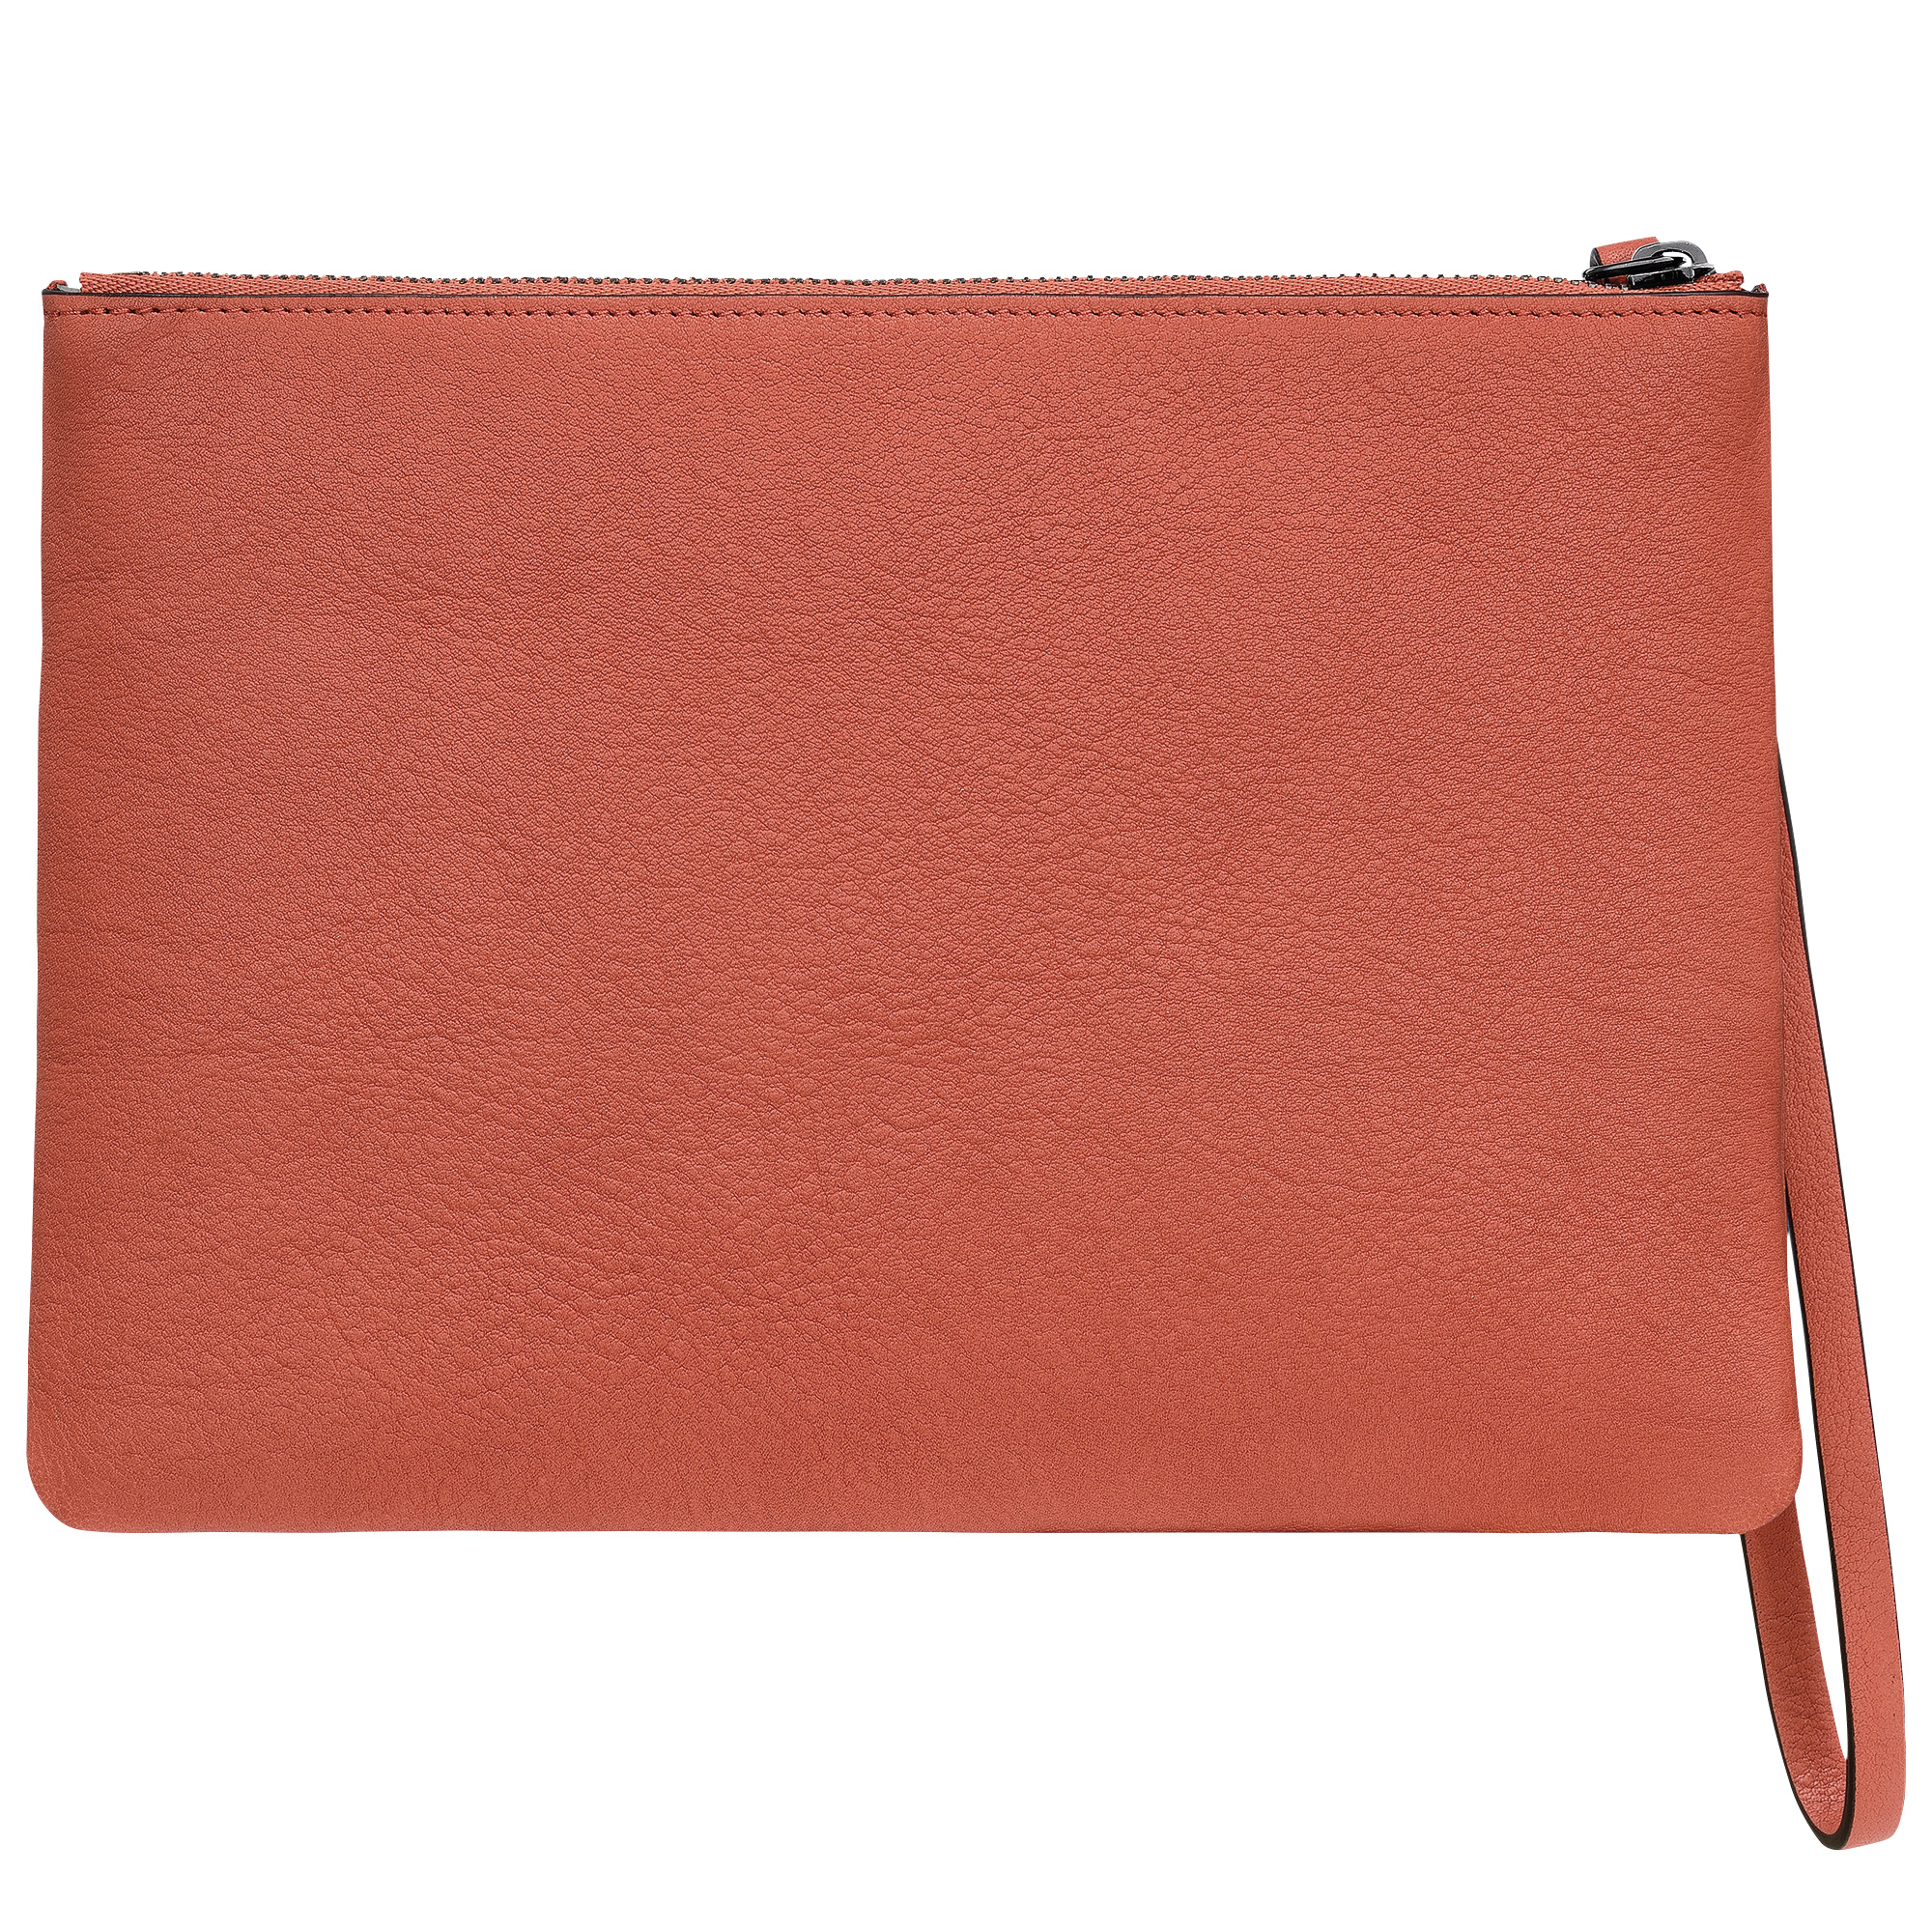 Longchamp 3D Pouch Sienna - Leather - 3